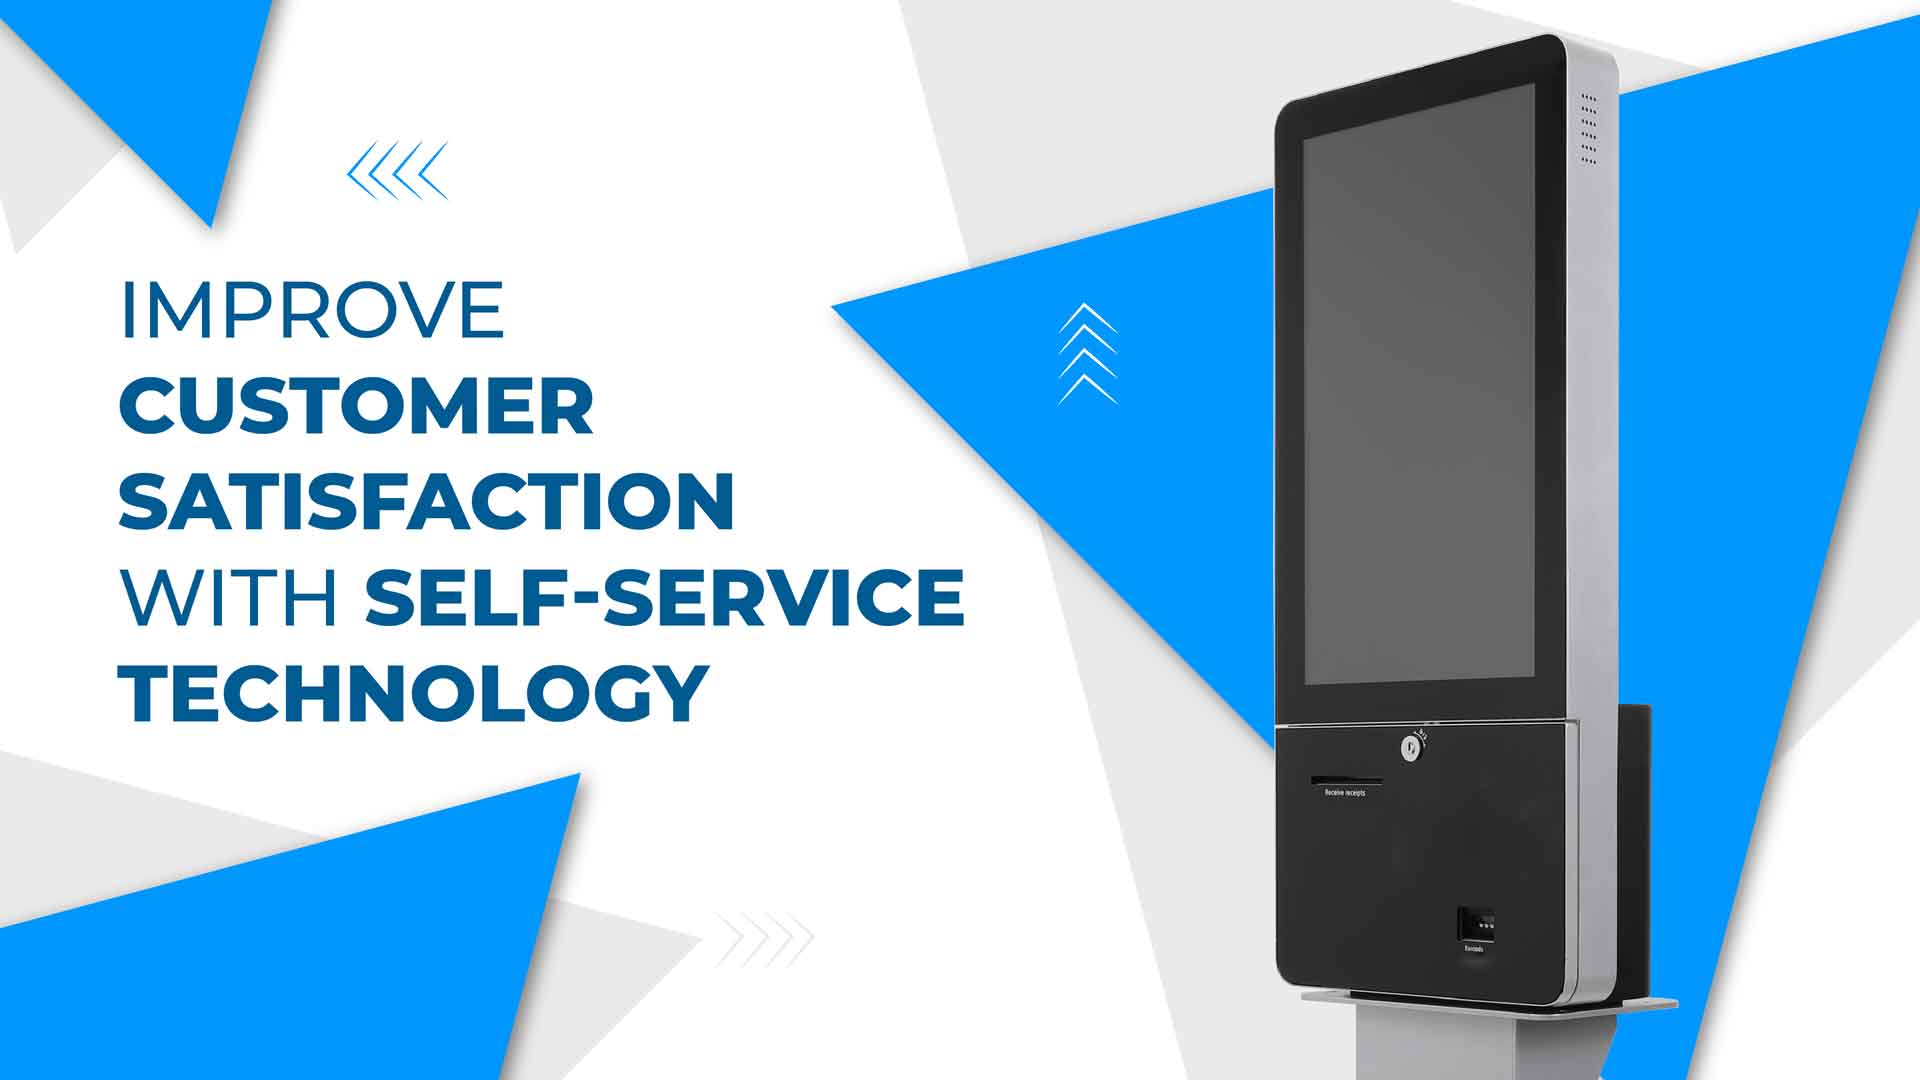 Improve customer satisfaction with self-service technology